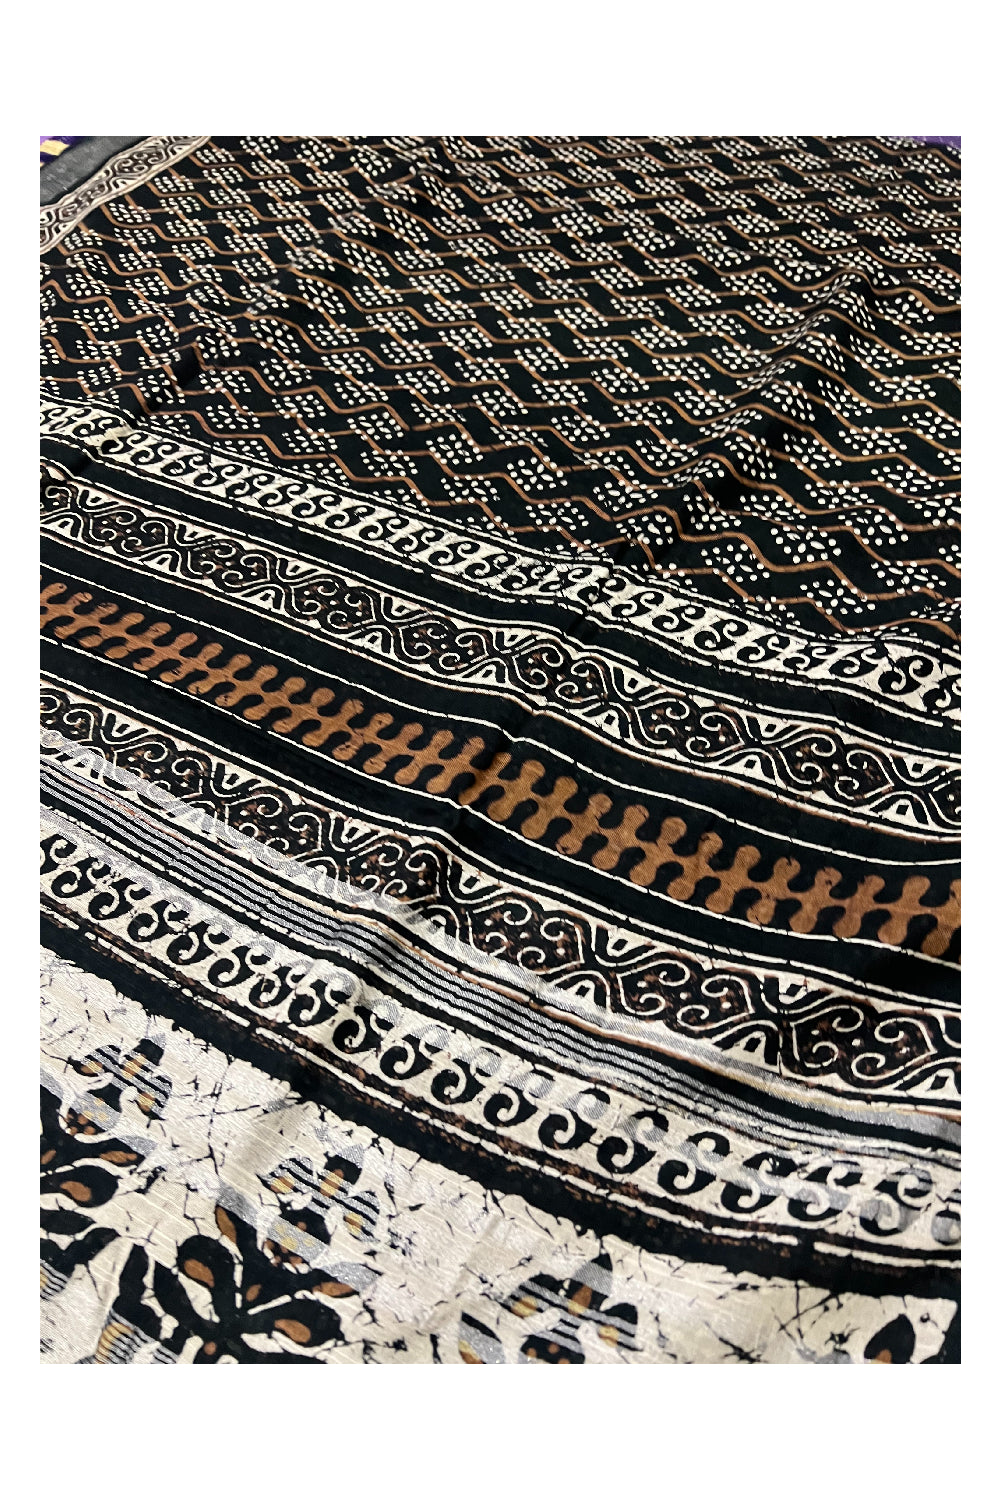 Southloom Linen Black Saree with White Designer Prints and Tassels on Pallu